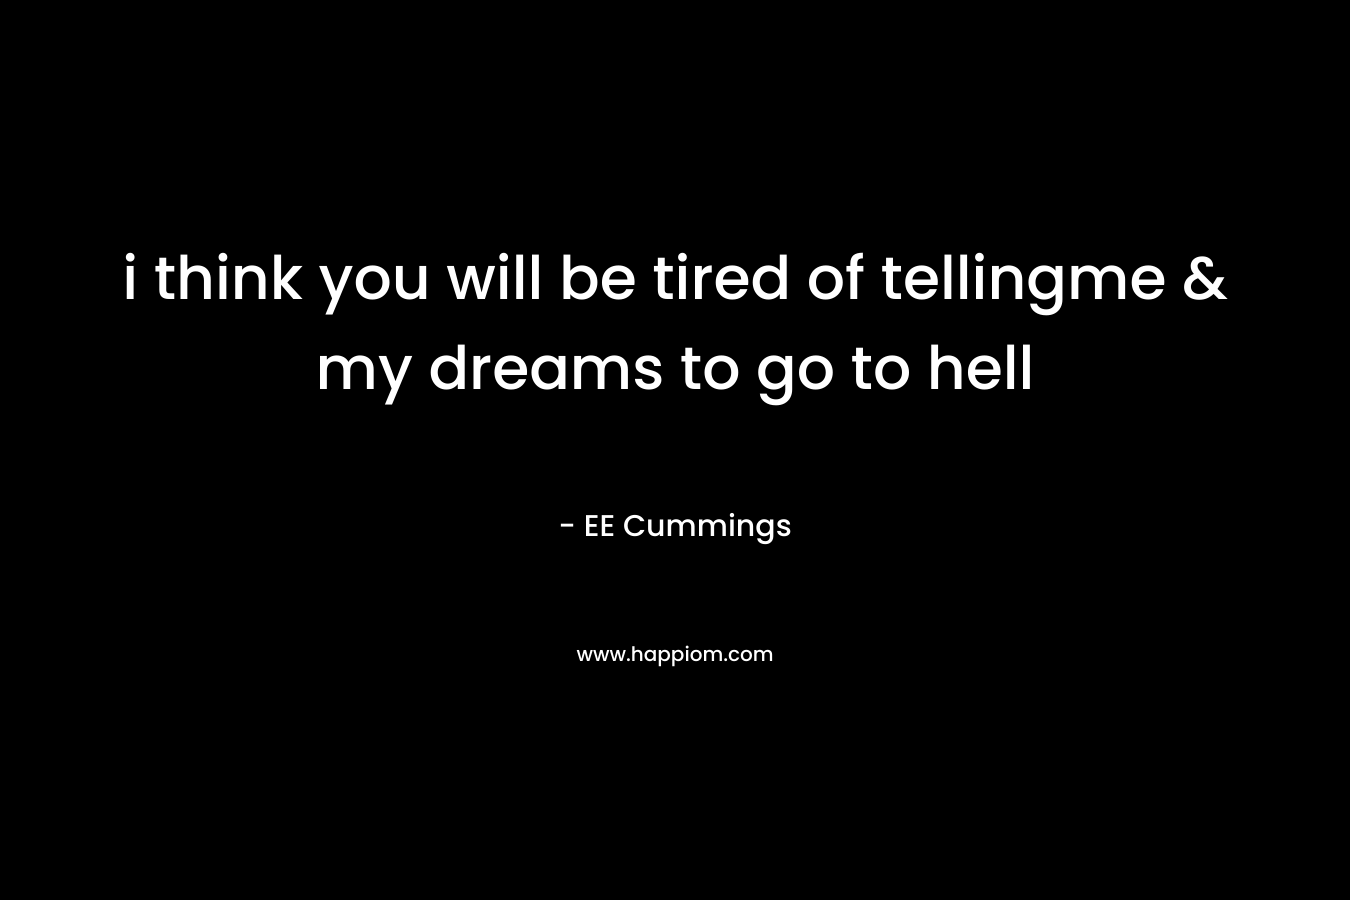 i think you will be tired of tellingme & my dreams to go to hell